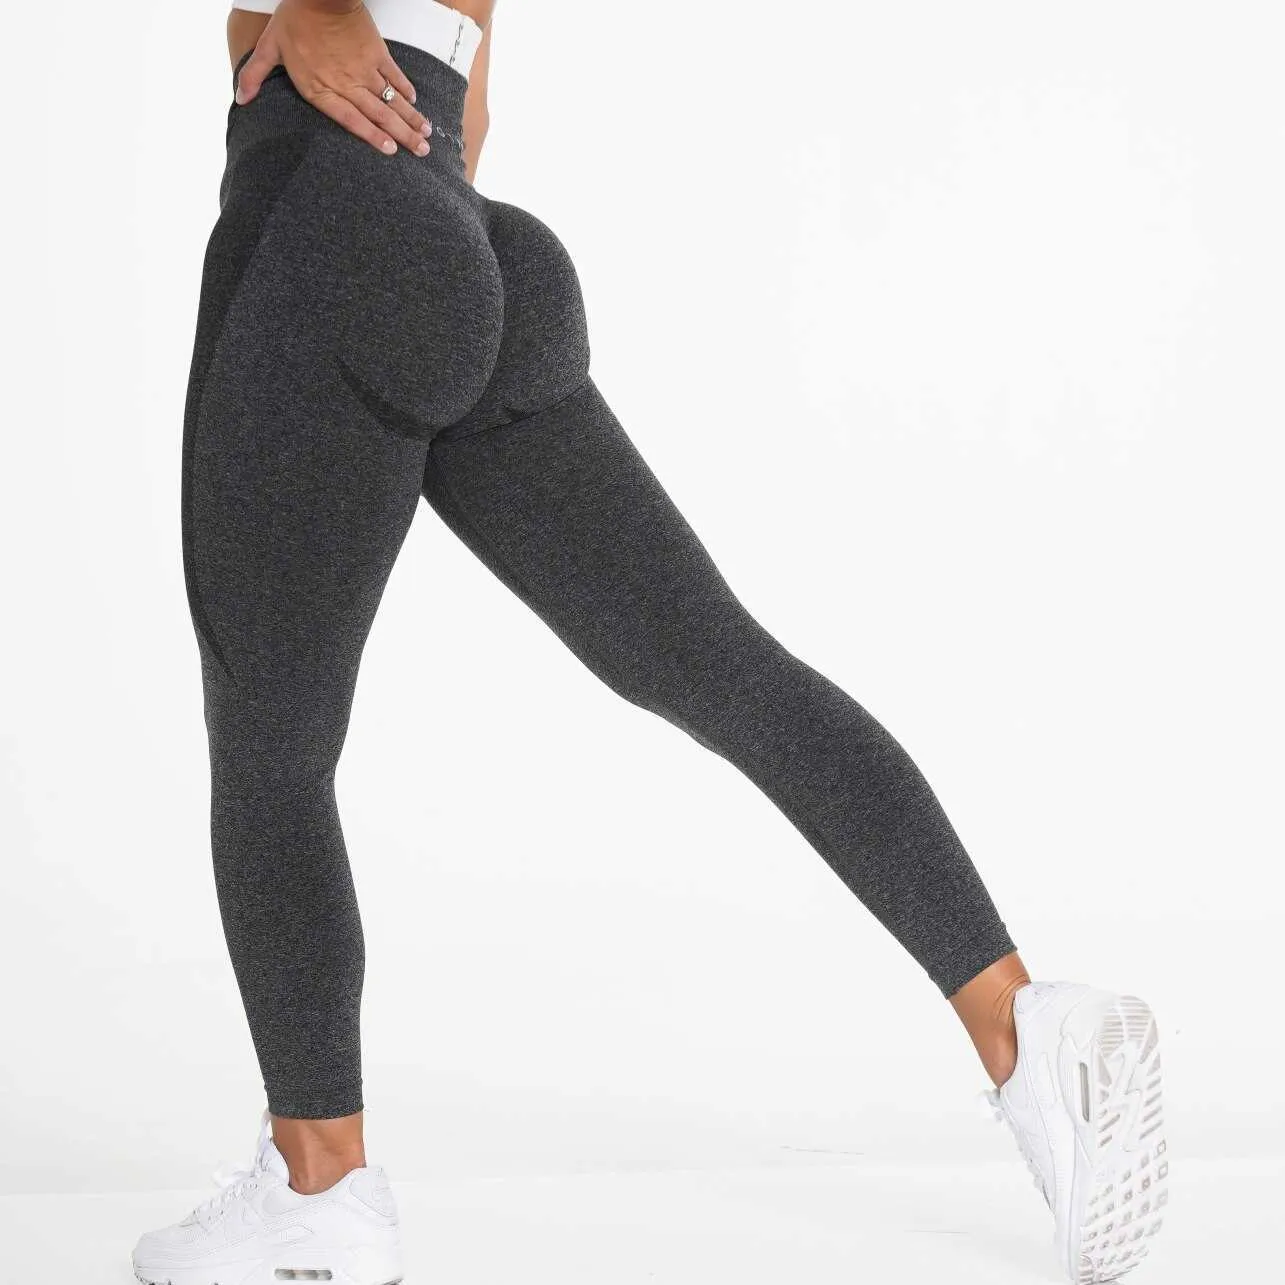 High Waist Seamless Sport Leggings For Women Butt Lift, Curves, Elastic Workout  Gym Tights Women For Fitness, Yoga, And Gym Training Style X0831 From  Vip_official_001, $4.83